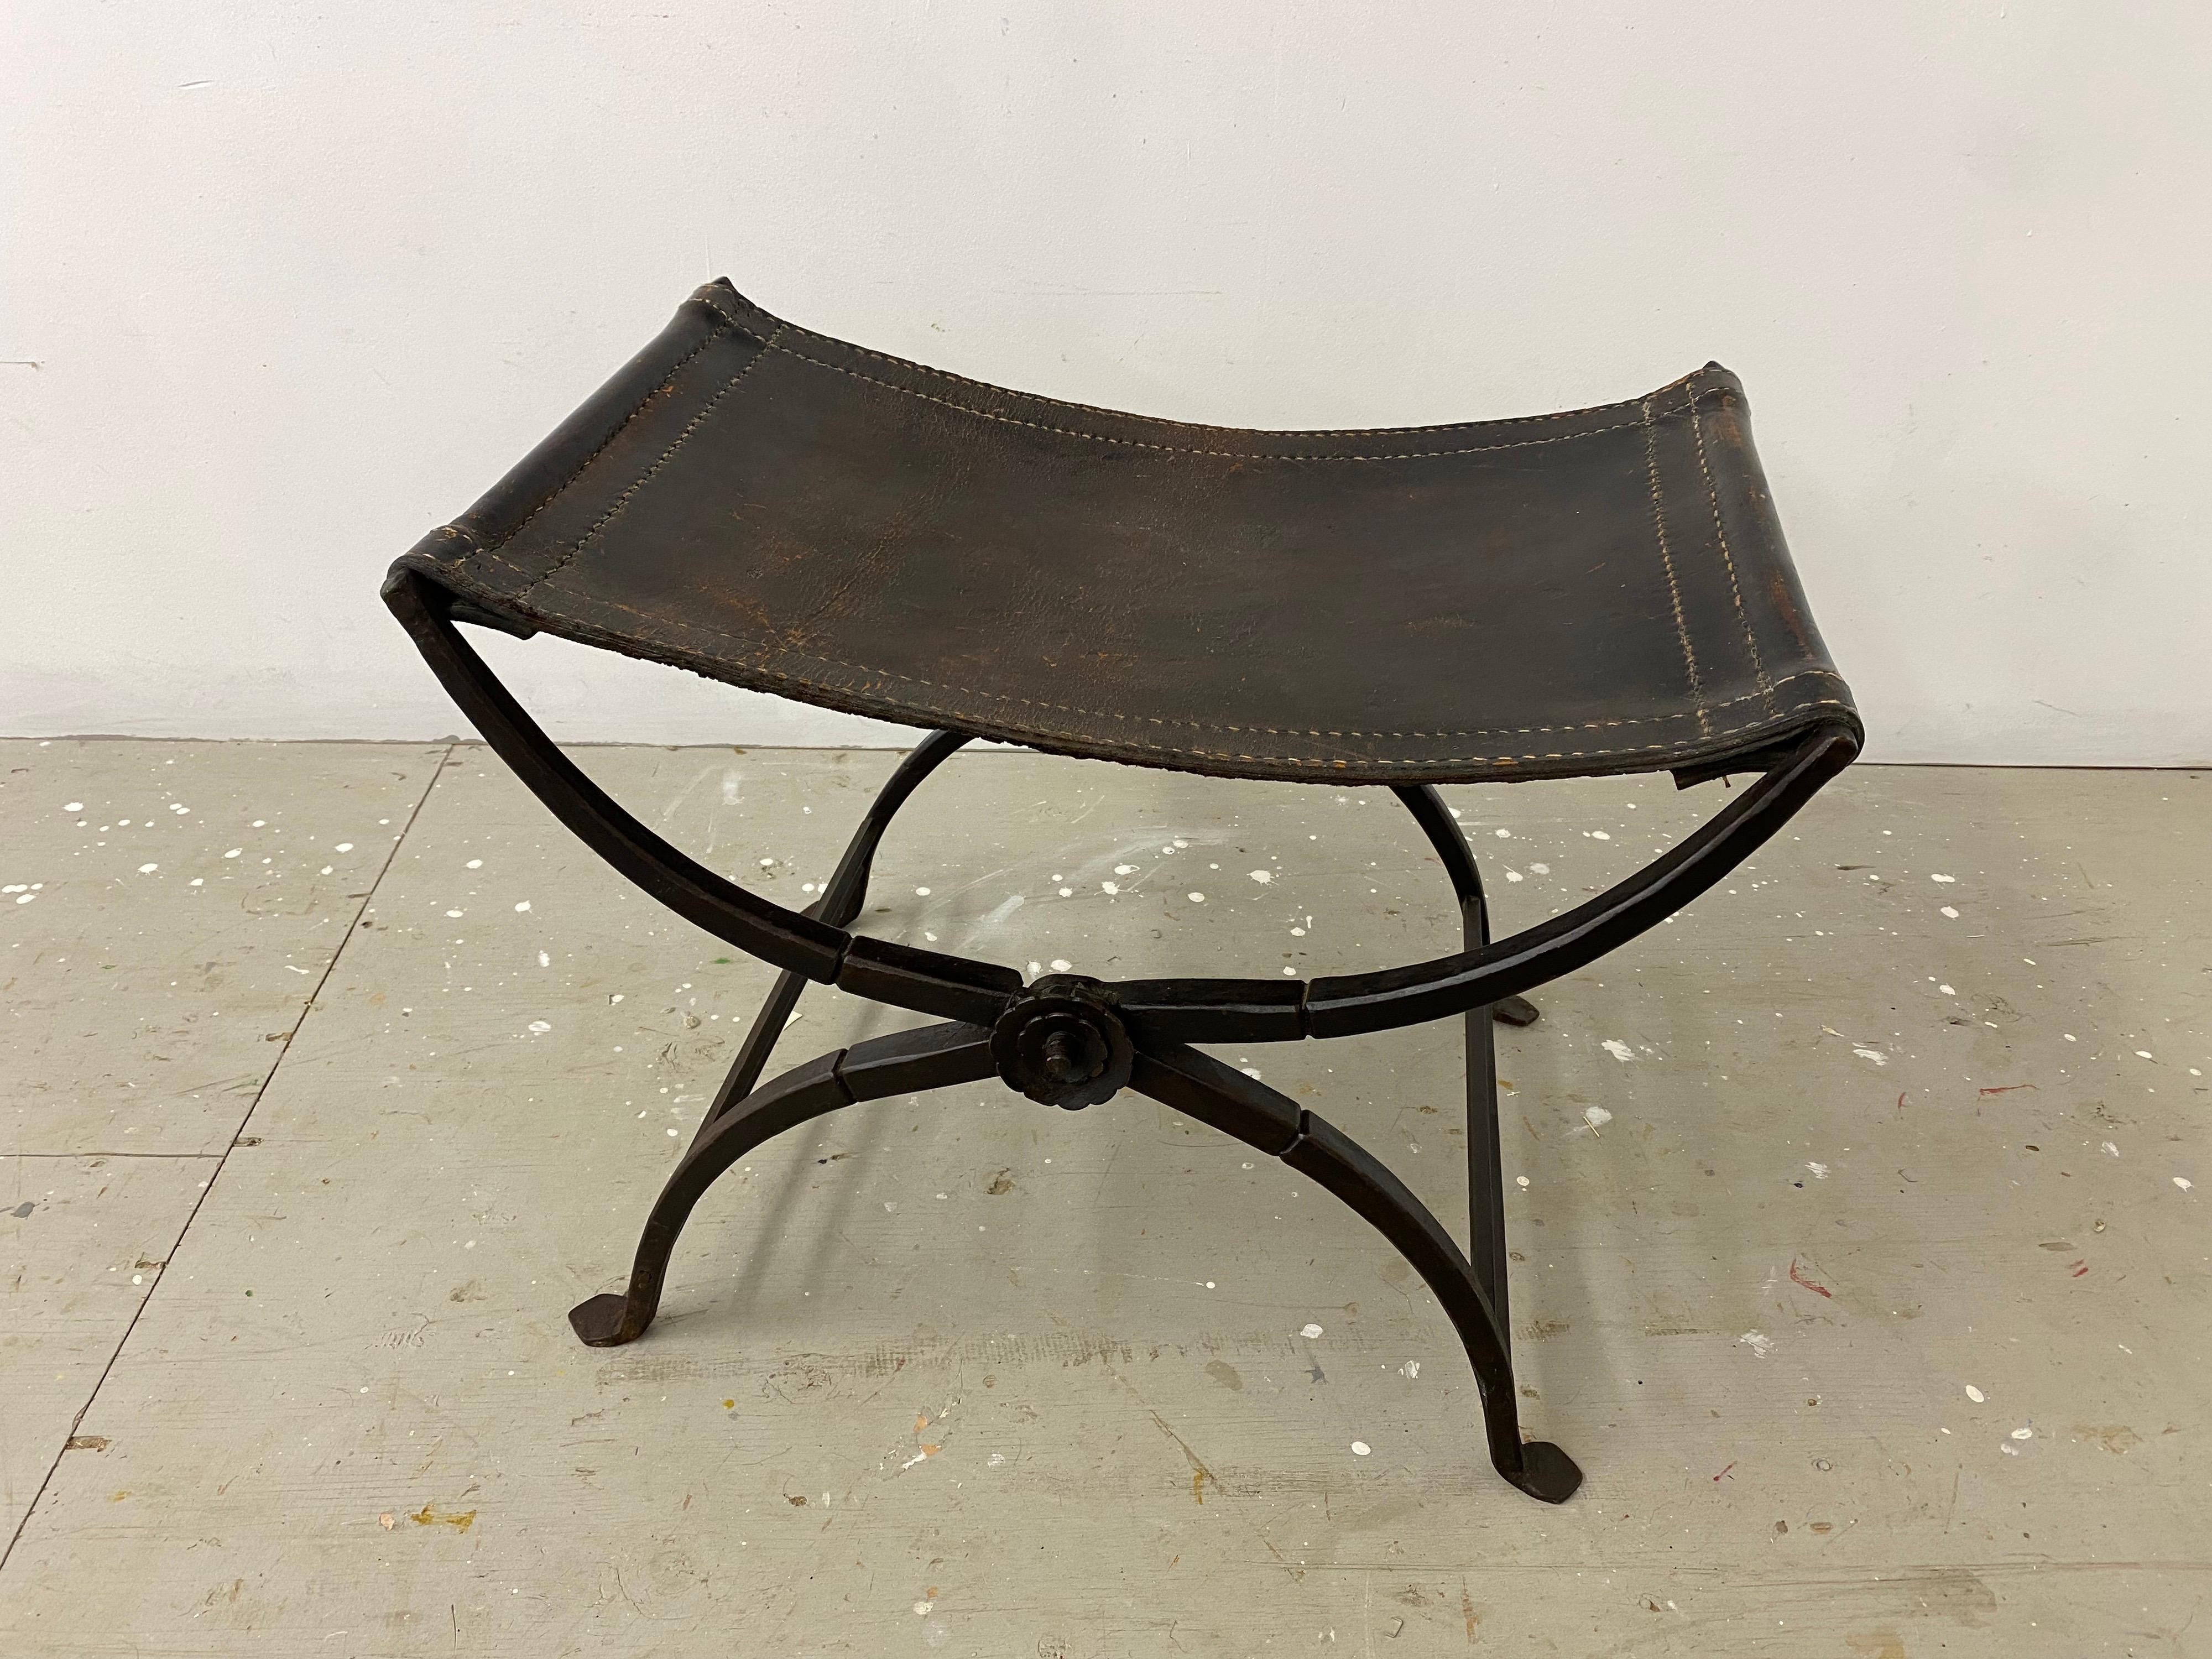 Hand-Forged Iron with Stitched Saddle leather makes this Curule Stool a Classic Roman Form! Curule Stools have been re-imagined and embellished since the Romans first introduced this Classic Form. This Folding Stool with Rosettes on both sides is